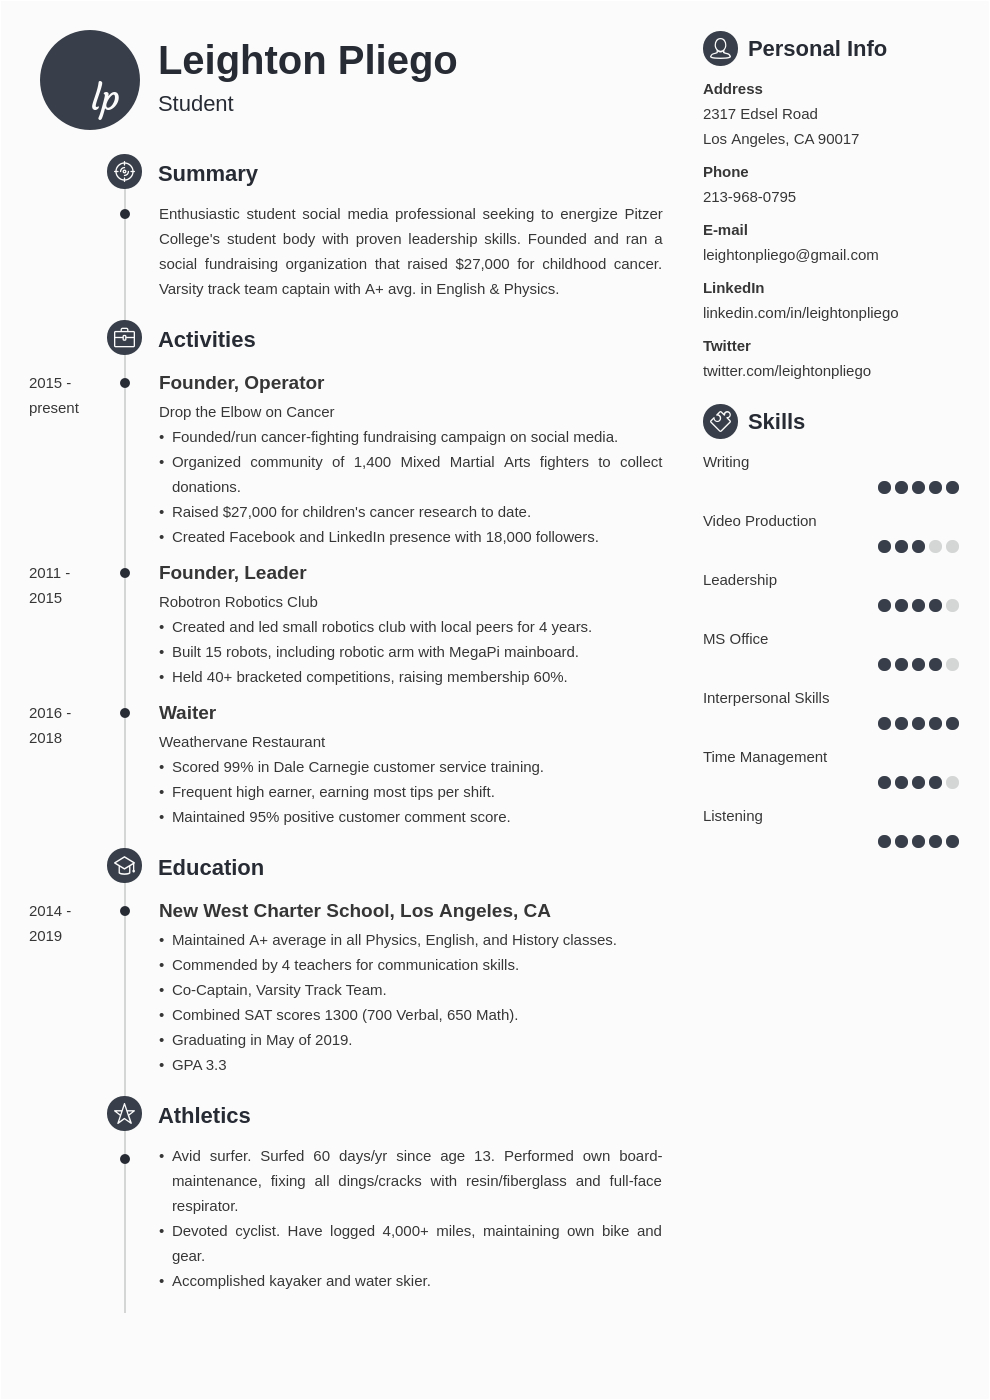 Sample Resume for High School Student Applying to College College Application Resume Template for High School Students